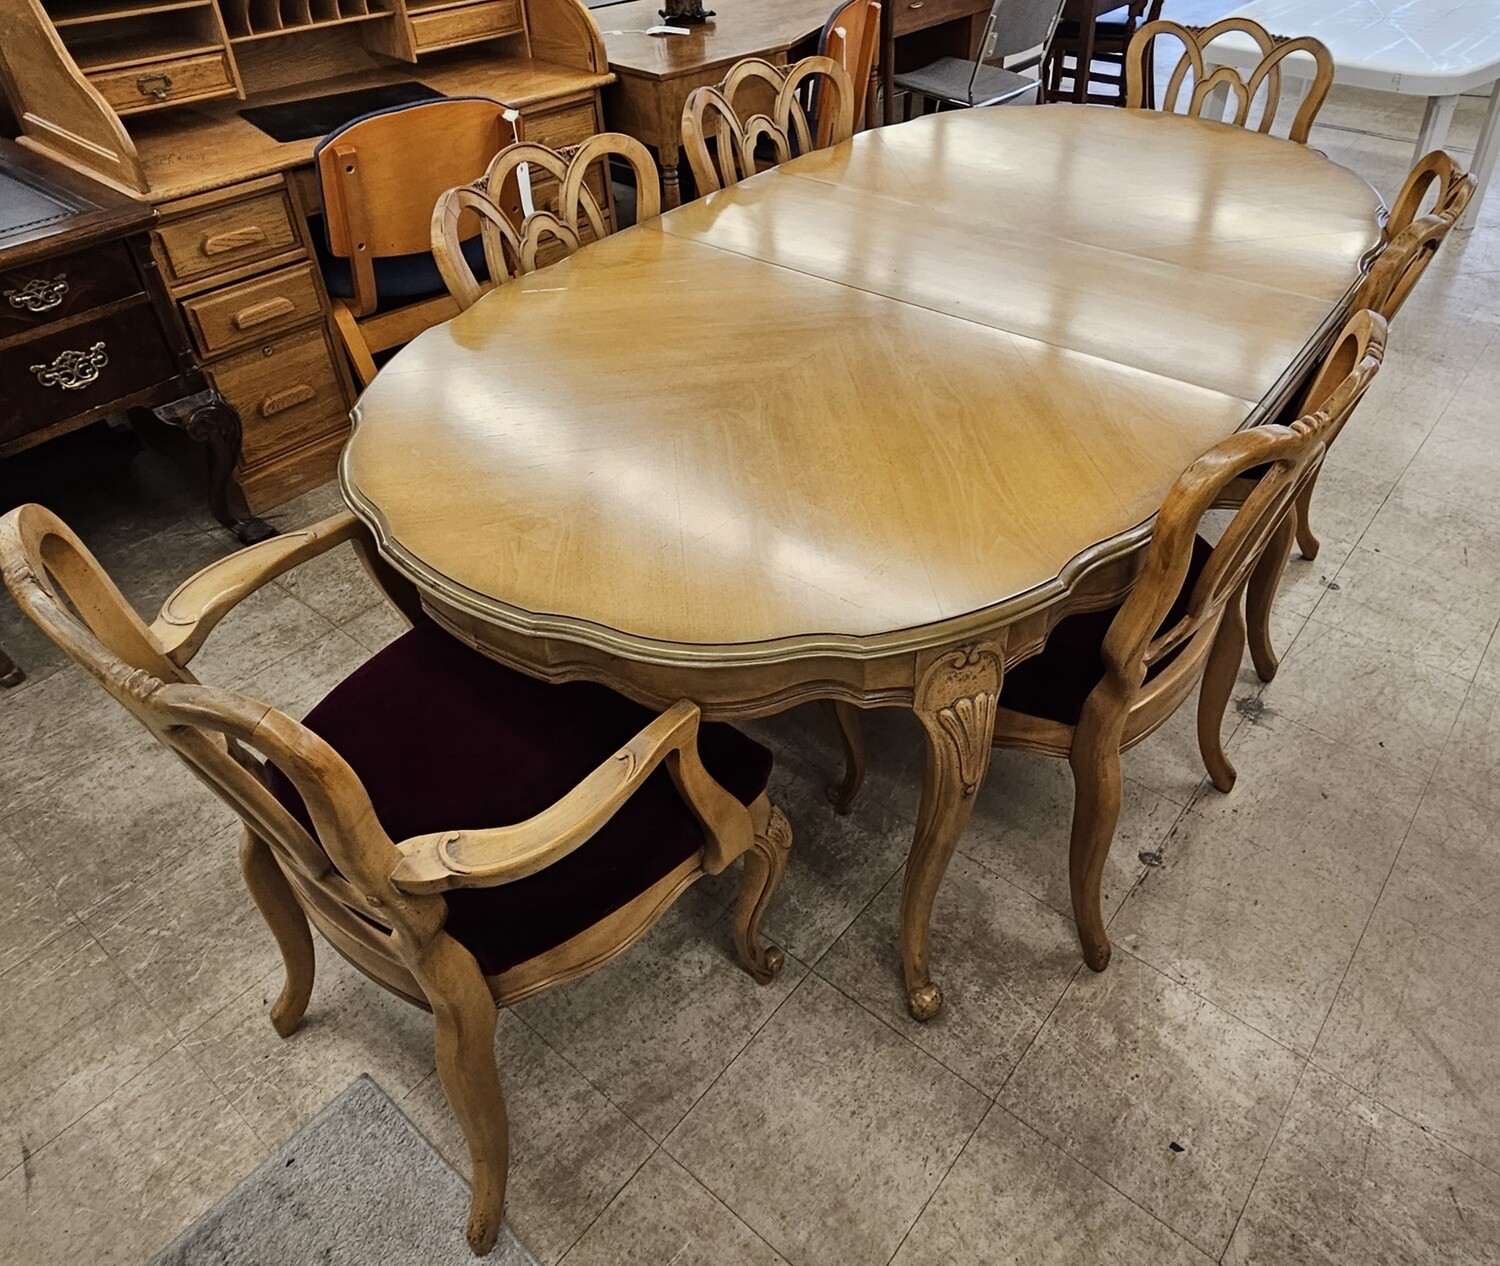 French Provincial Dining Table with Six Chairs